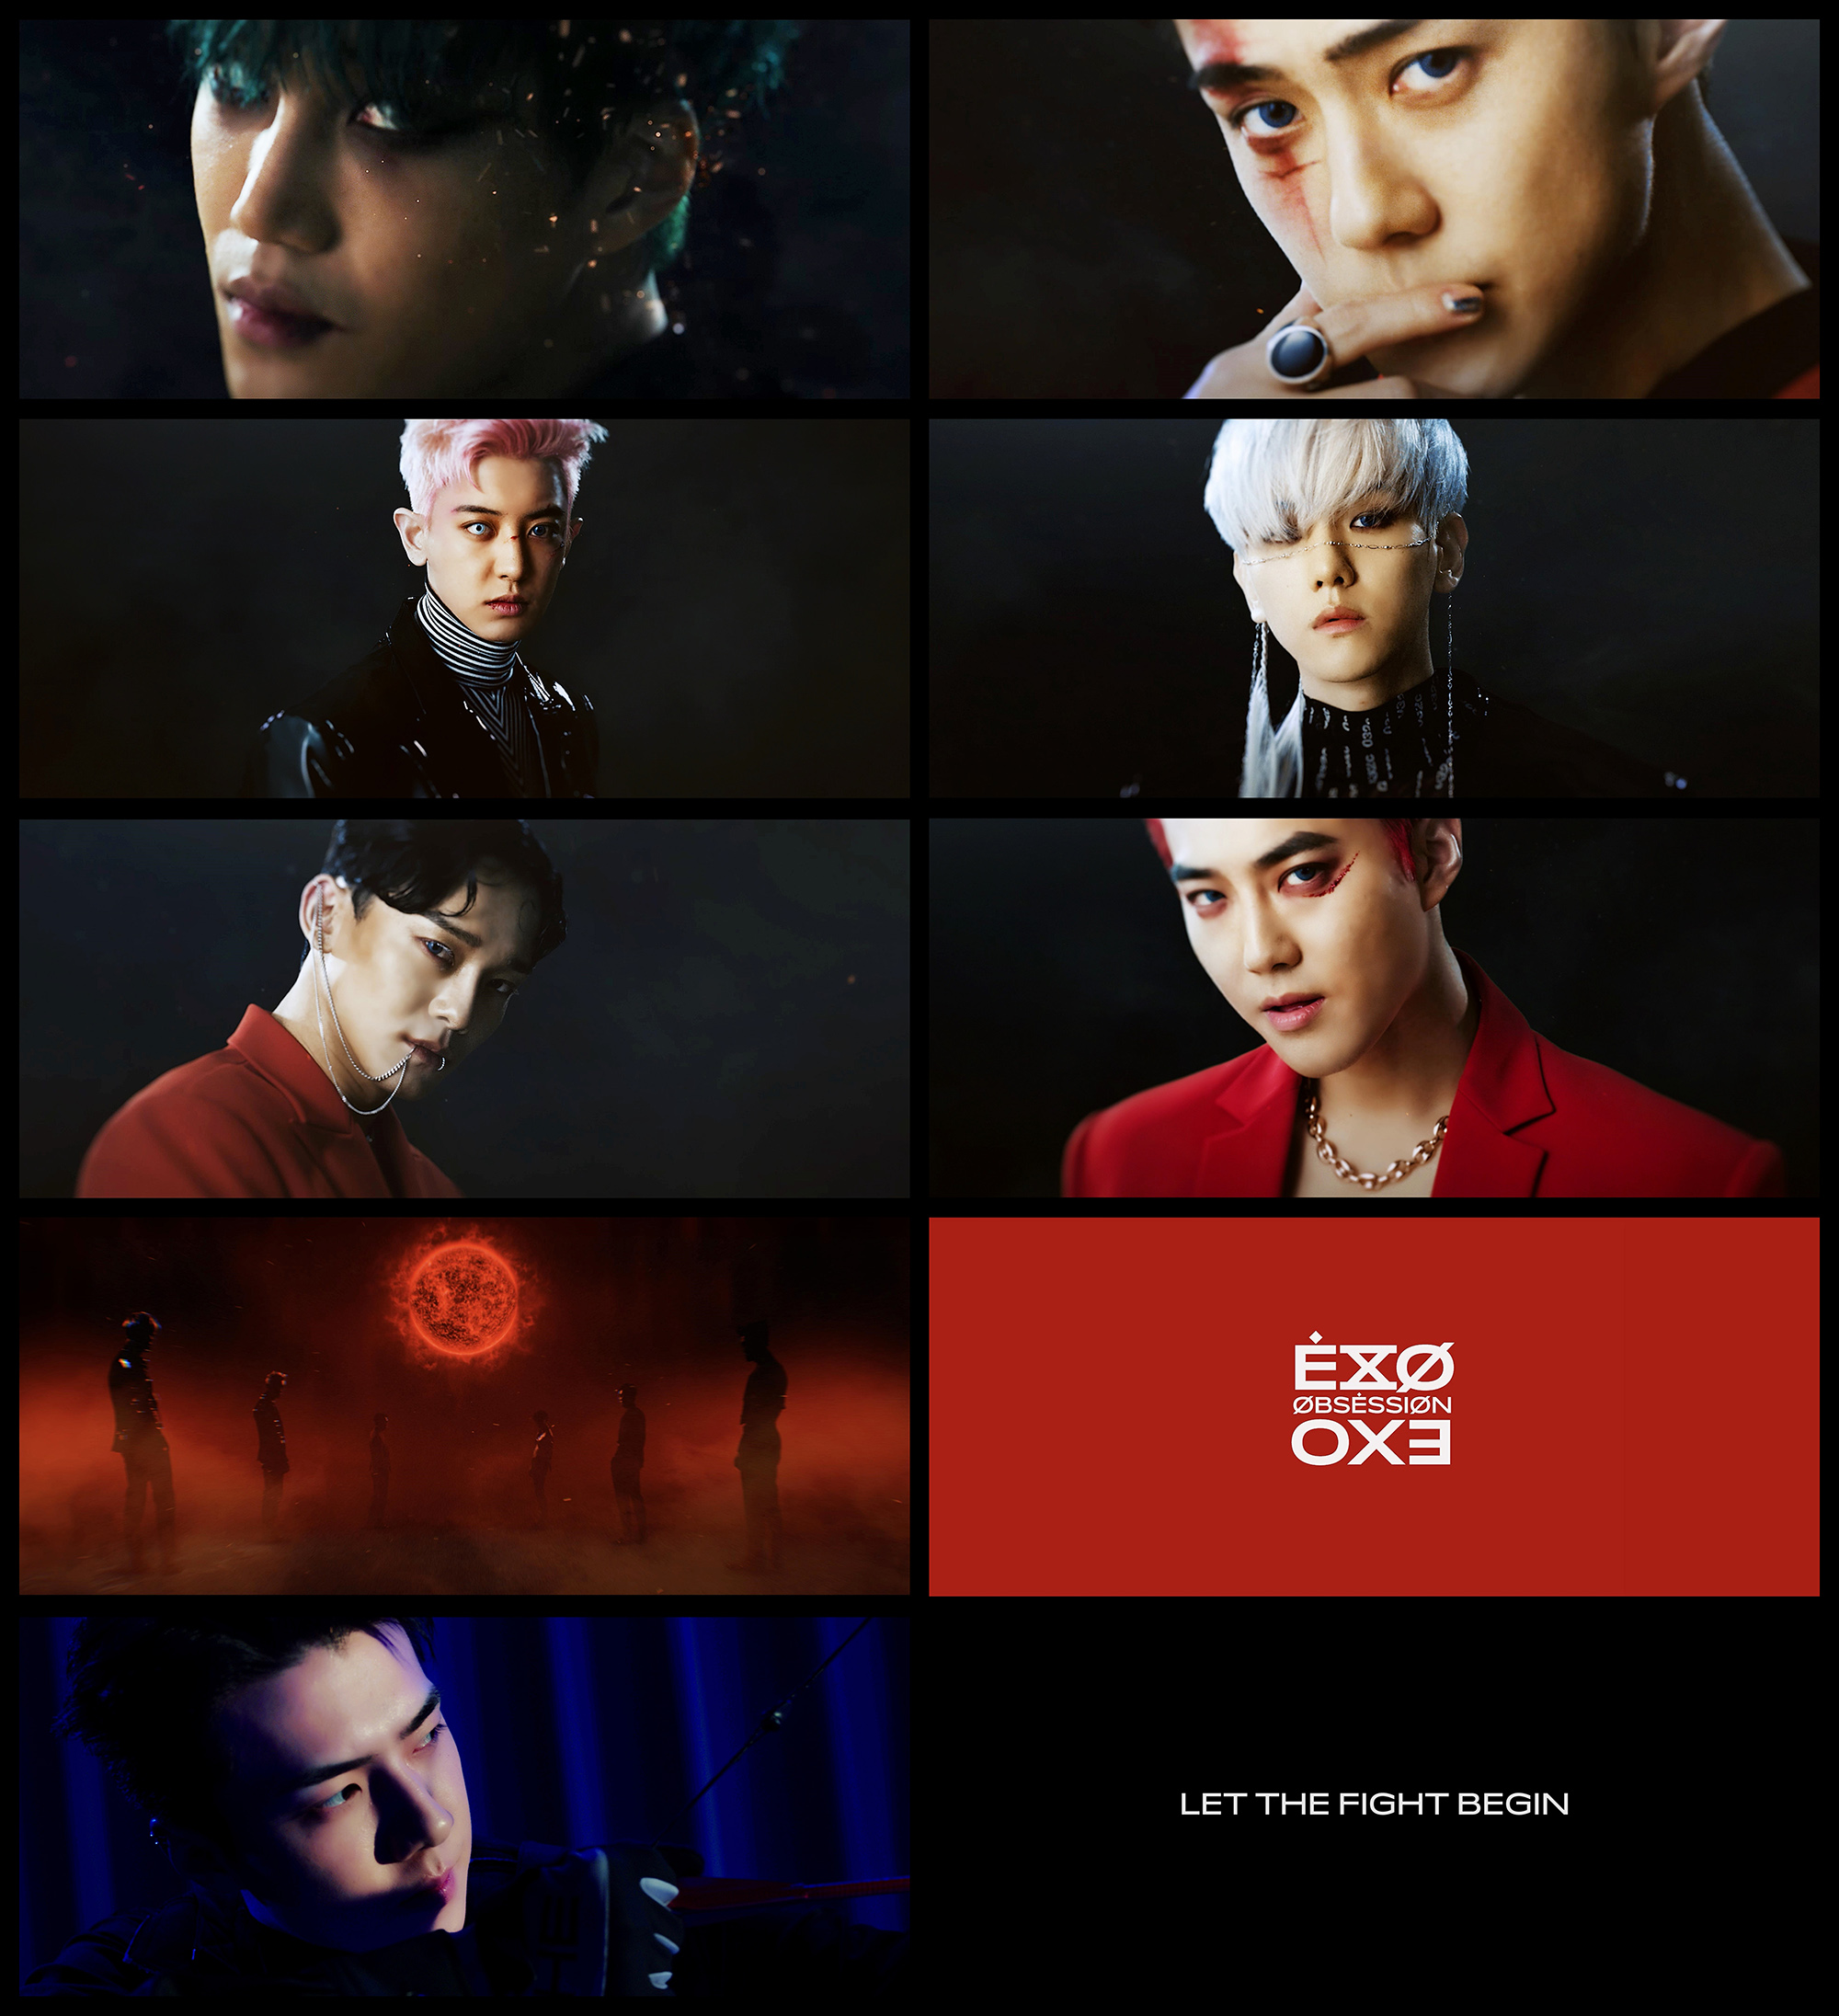 EXO (a member of SM Entertainment), which announces its regular 6th album OBSESSION (Option) on November 27, has entered comeback countdown with a breakthrough promotion.A trailer video was released today at 0:00 on the official EXO website and various SNS accounts to announce the start of the #EXODEUX (#EXODUX) promotion, and the #EXODEUX promotion is expected to raise expectations for a new album with a different teaser promotion that combines the concept of the regular 6th album and EXOs world view storytelling that has been in place since its debut.The trailer video released today is getting a hot response by foreshadowing the emergence of another EXO, the so-called X-EXO, created by the red energy, the subject of the conflict, and the Battle of EXO vs. X-EXO, which will be unfolded in the future.In addition, various SNS accounts of X-EXO will be opened, and various contents such as teaser images, videos, and music video teasers produced with contradictory concepts will be released sequentially through EXO and X-EXO accounts, which will focus attention on global fans.Also, at 12 oclock tonight, we will open the #EXODEUX mobile promotion page, show the Battle situation of EXO and X-EXO in real time based on the users response index such as the number of likes of contents released to both accounts, retweets and comments, and show reward contents about the concept that won in Battle in the future. It is expected to be the EUXs promotion.On the other hand, EXOs regular 6th album OBSESSION will be released on November 27th and can be purchased at various on-line and off-line music stores.iMBC Cha Hye-mi  Photos